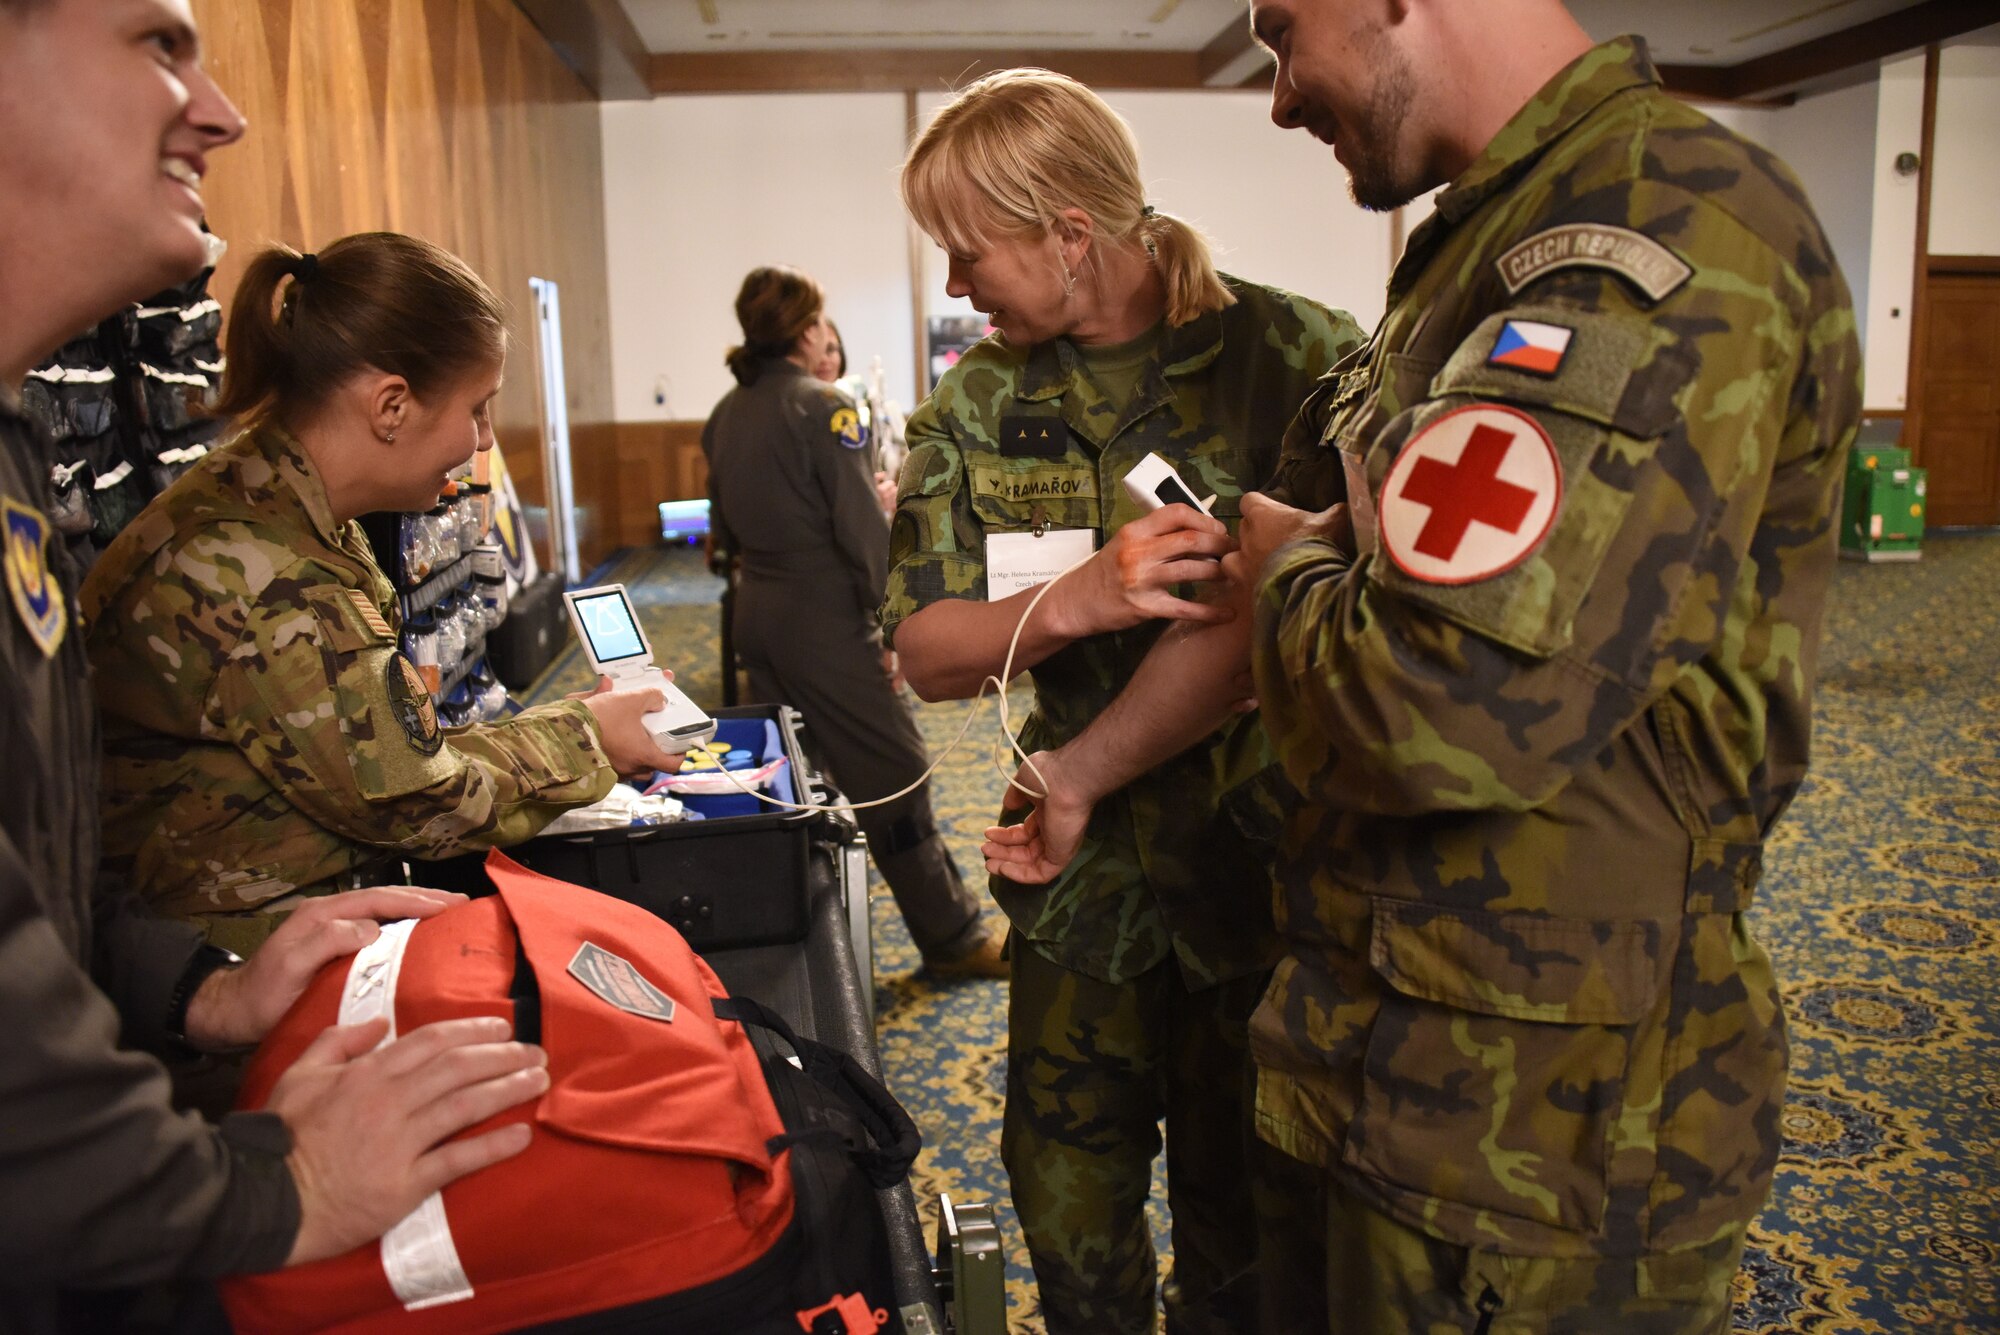 U.S. Air Force Capt. Sarah Juhaz, 10th Air Expeditionary Aeromedical Evacuation Flight critical care nurse, explains the functions and capabilities of the Critical Care Air Transport Team’s portable ultrasound to delegates from the Czech Republic during U.S. Air Forces in Europe - Air Forces Africa’s European-African Military Nursing Exchange conference at Ramstein Air Base, Germany, May 10, 2022.